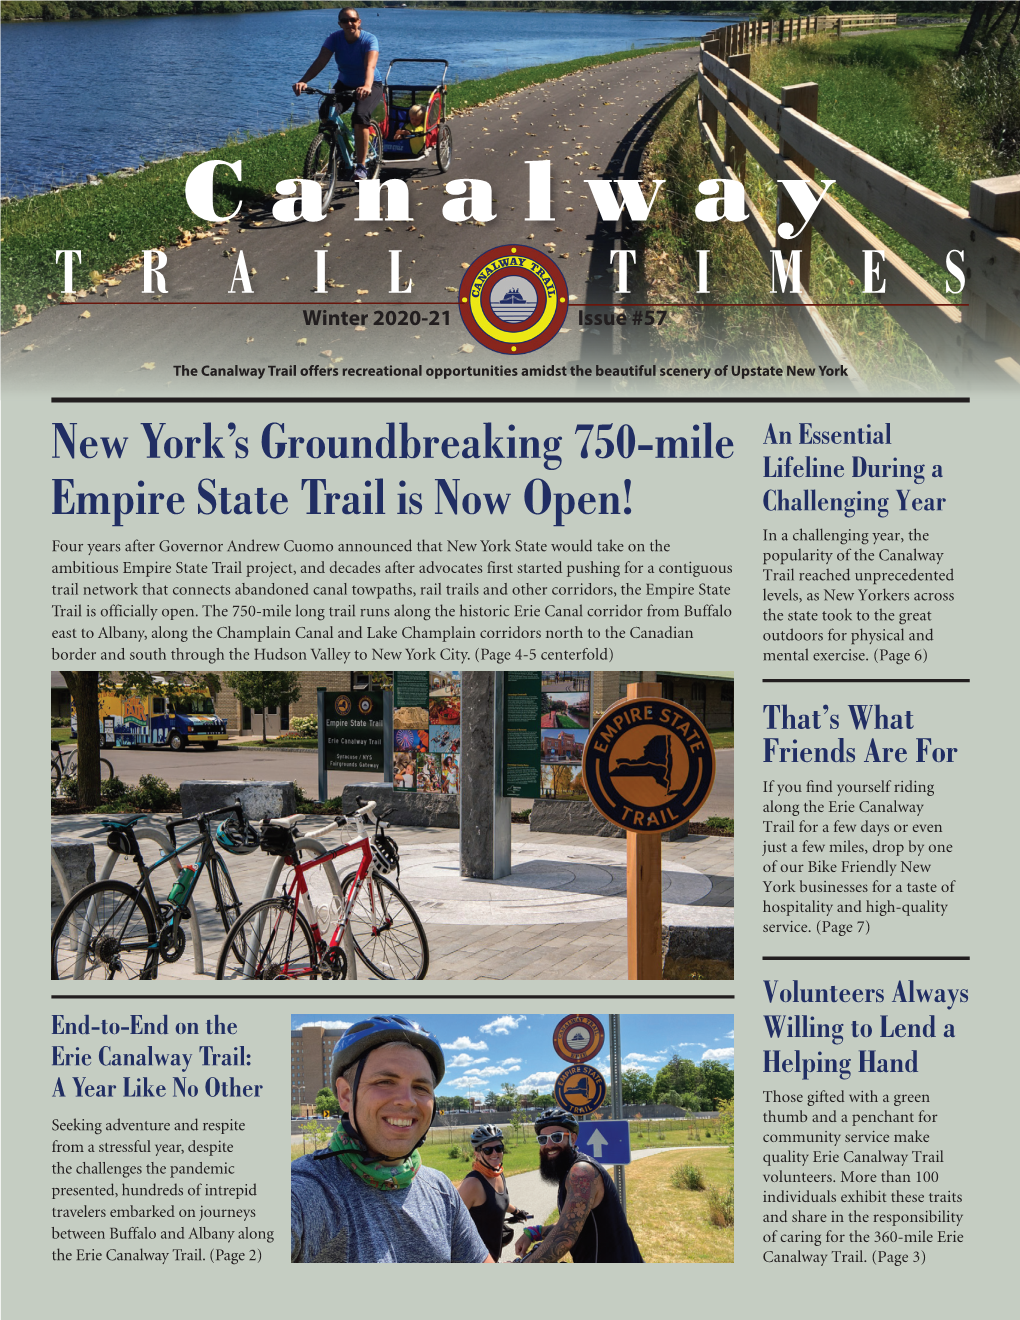 End-To-End on the Erie Canalway Trail